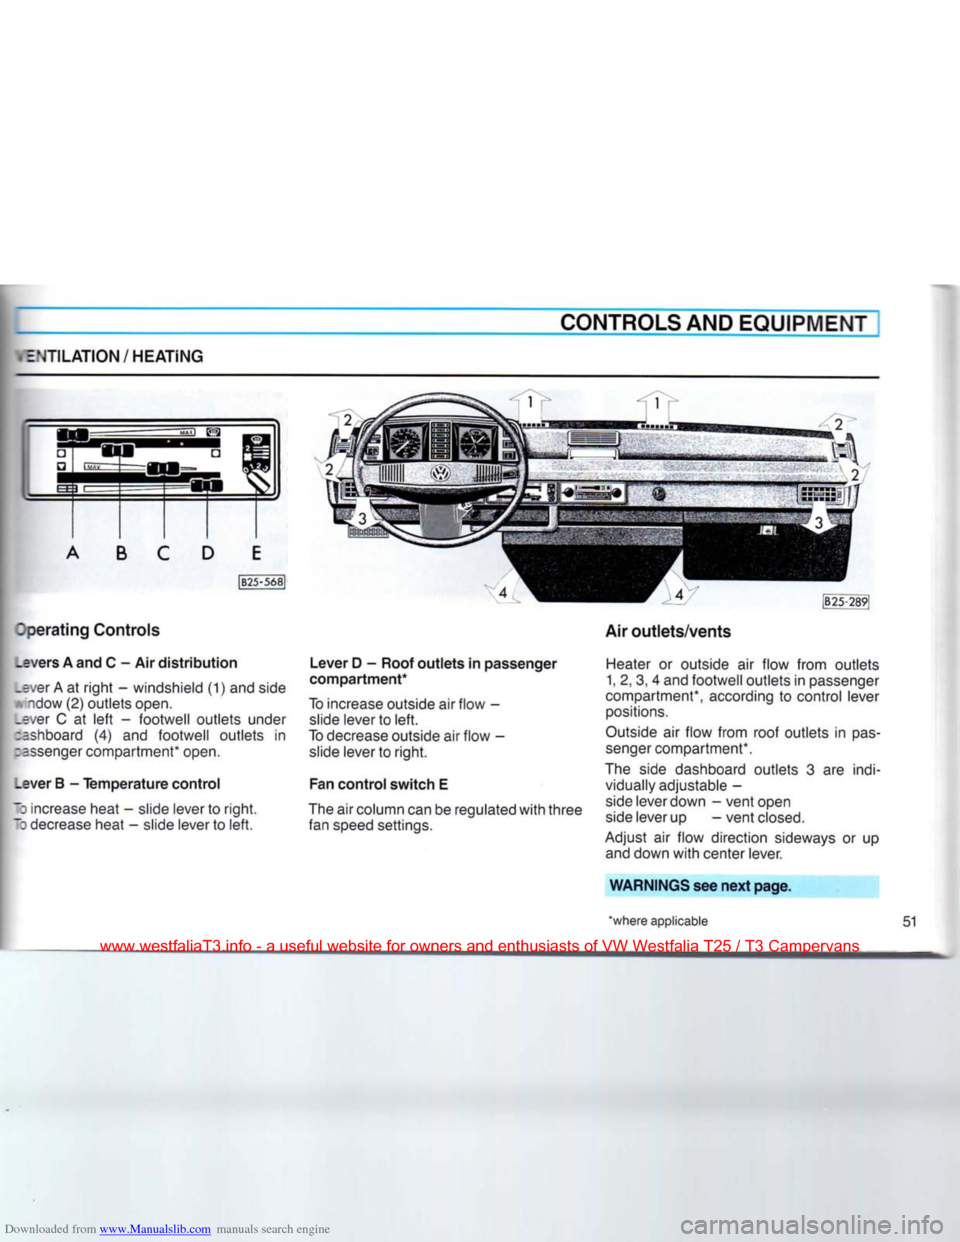 VOLKSWAGEN TRANSPORTER 1990 T4 / 4.G Owners Manual Downloaded from www.Manualslib.com manuals search engine 
EMULATION/HEATING 

CONTROLS
 AND EQUIPMENT 
I
 perating
 Controls 

_evers
 A and C - Air
 distribution 

.ever A at
 right
 - windshield (1)